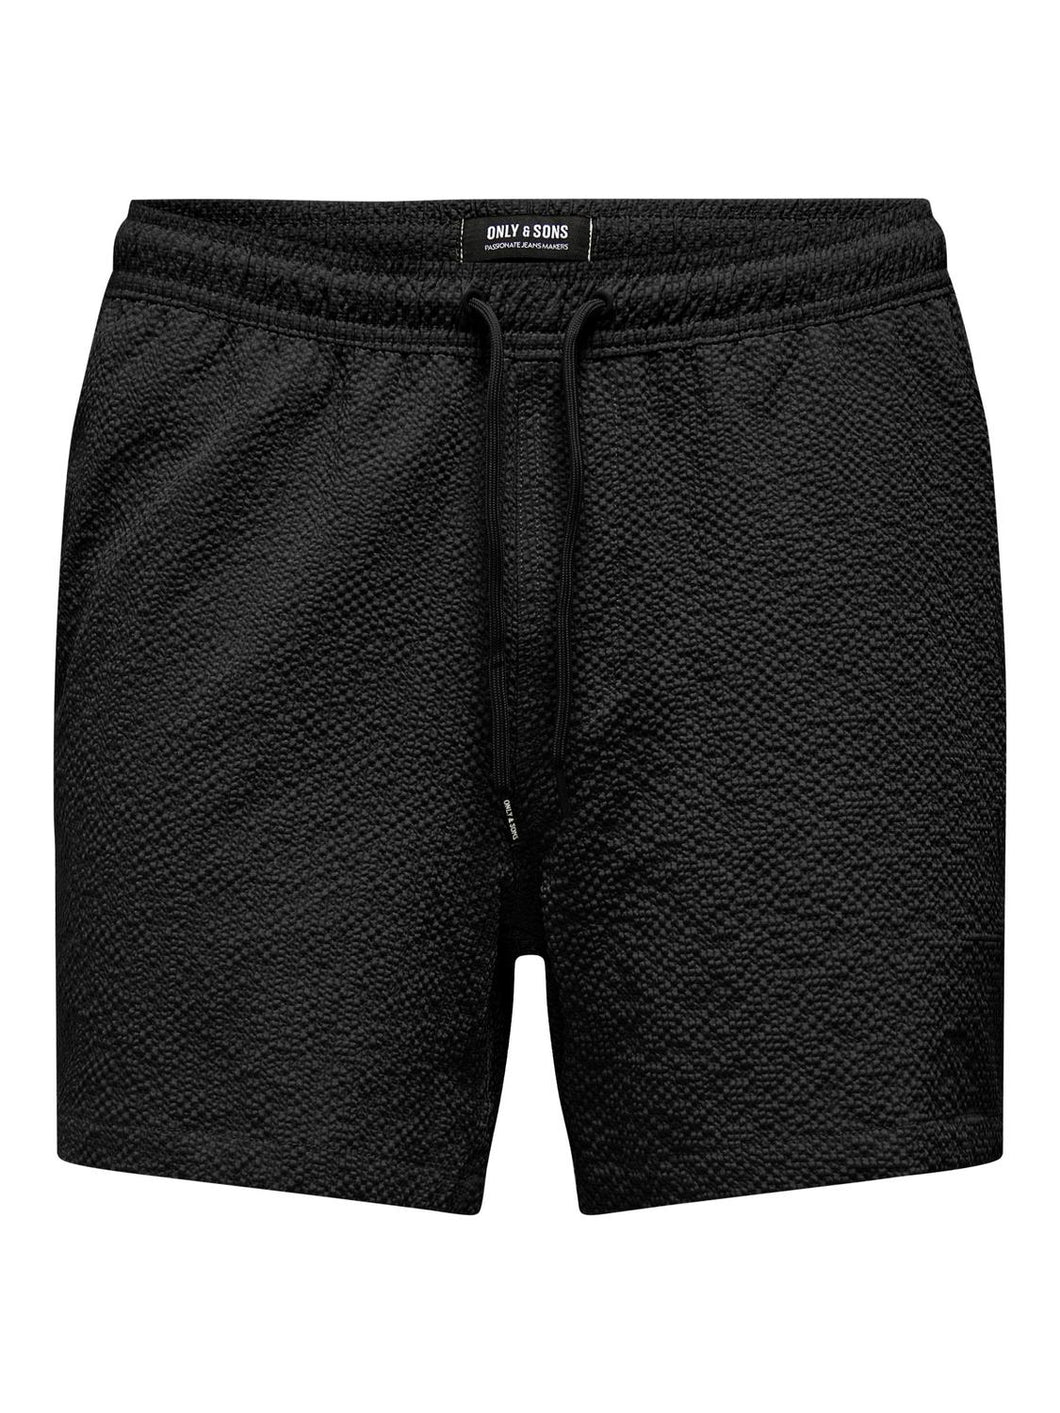 SWIM SHORTS ONLY & SONS 22028813